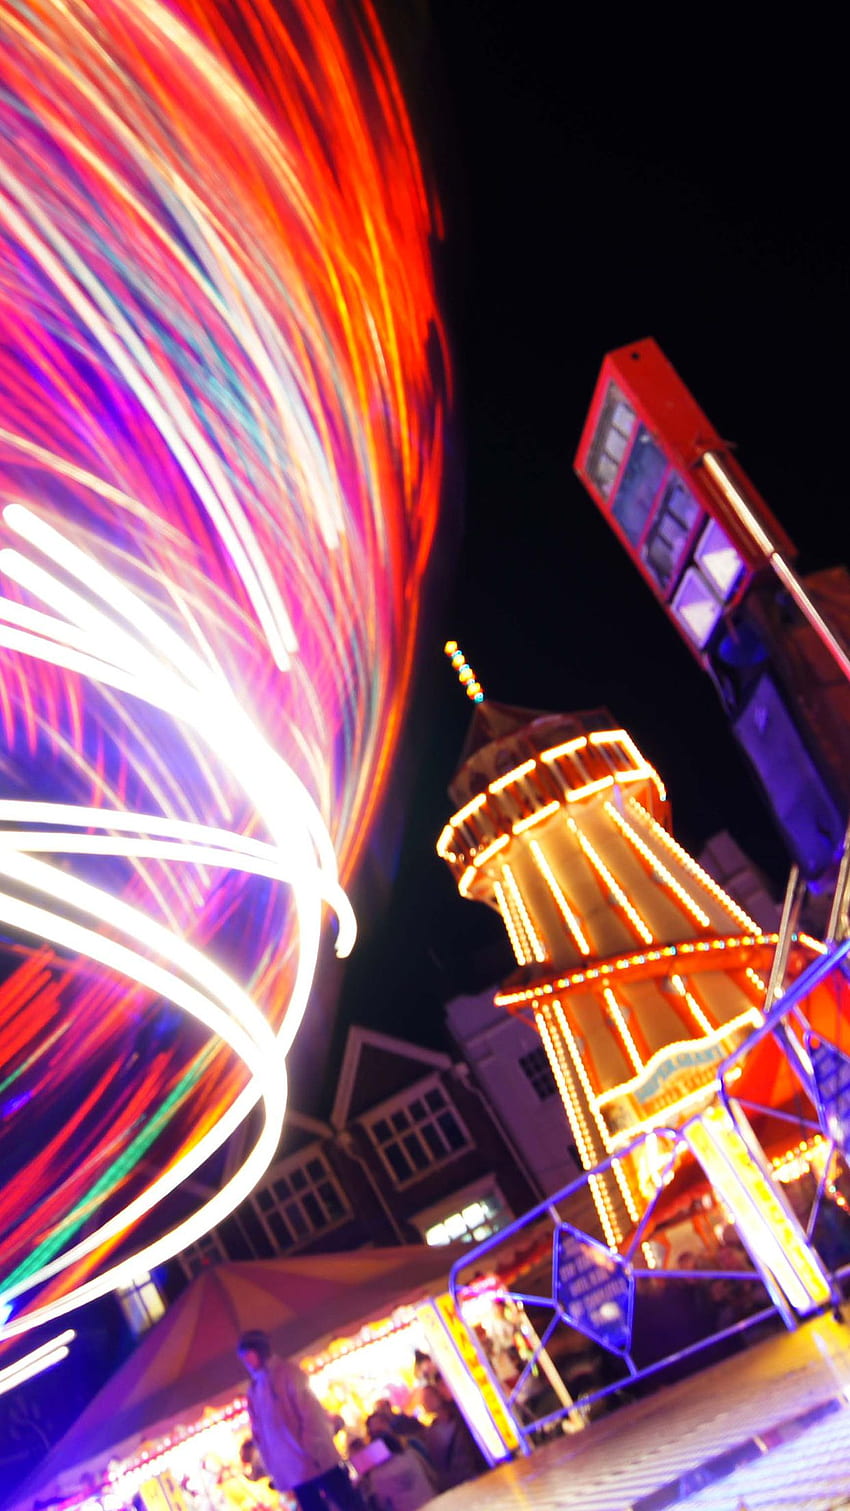 Funfair Light 2 for iPhone 11, Pro Max, X, 8, 7, 6 - on 3 HD phone wallpaper